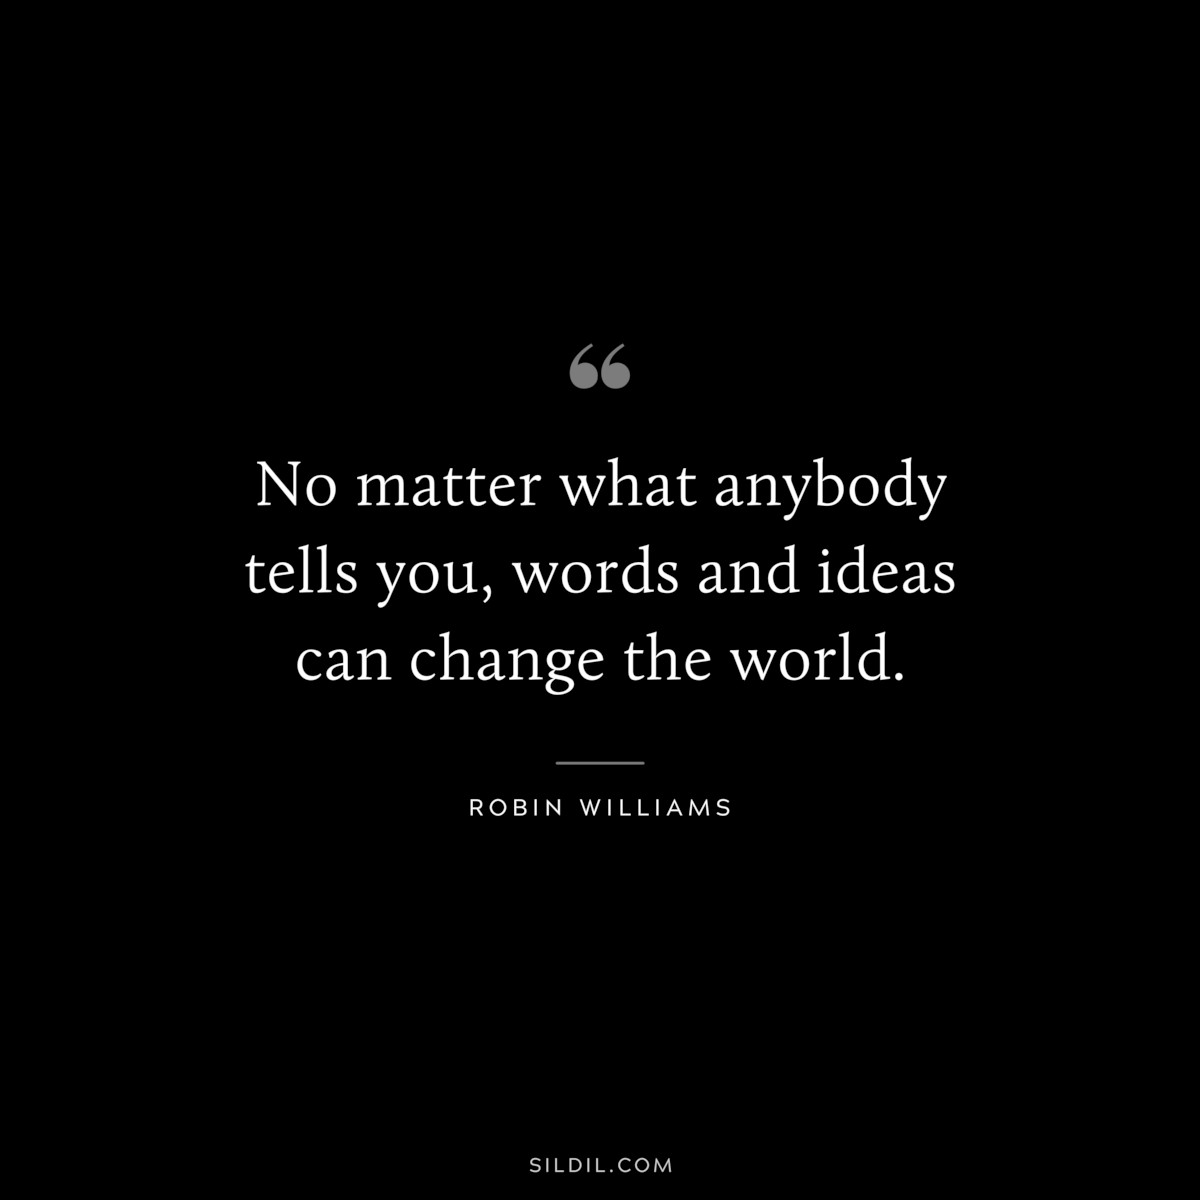 No matter what anybody tells you, words and ideas can change the world. ― Robin Williams